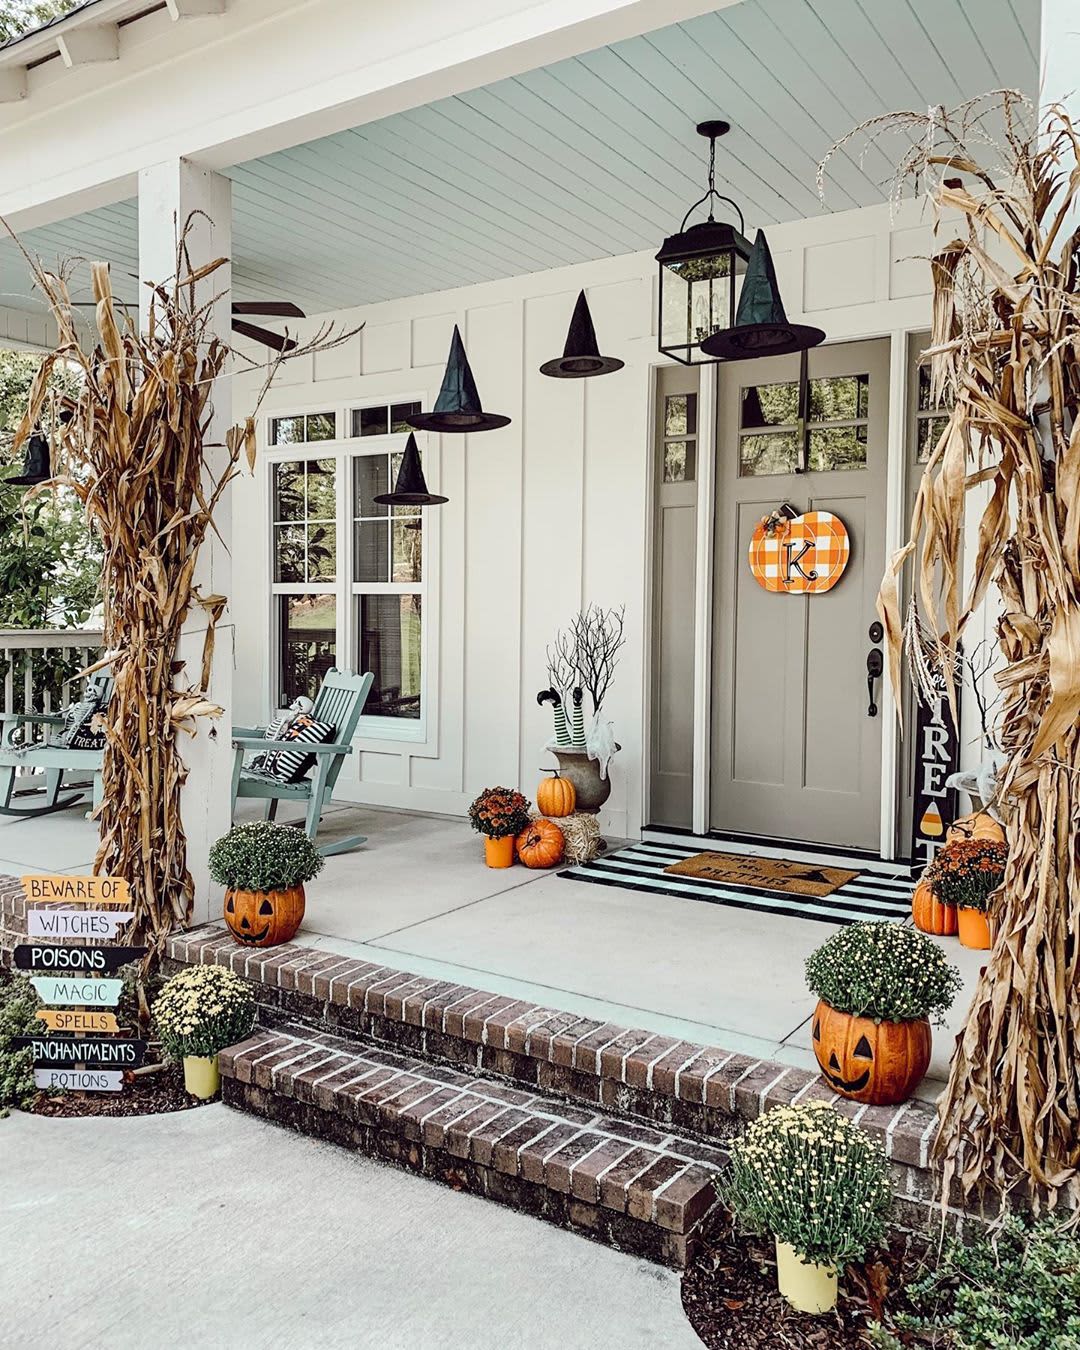 Embrace the Fall Vibes: Transform Your Home With Cozy Autumn Decor